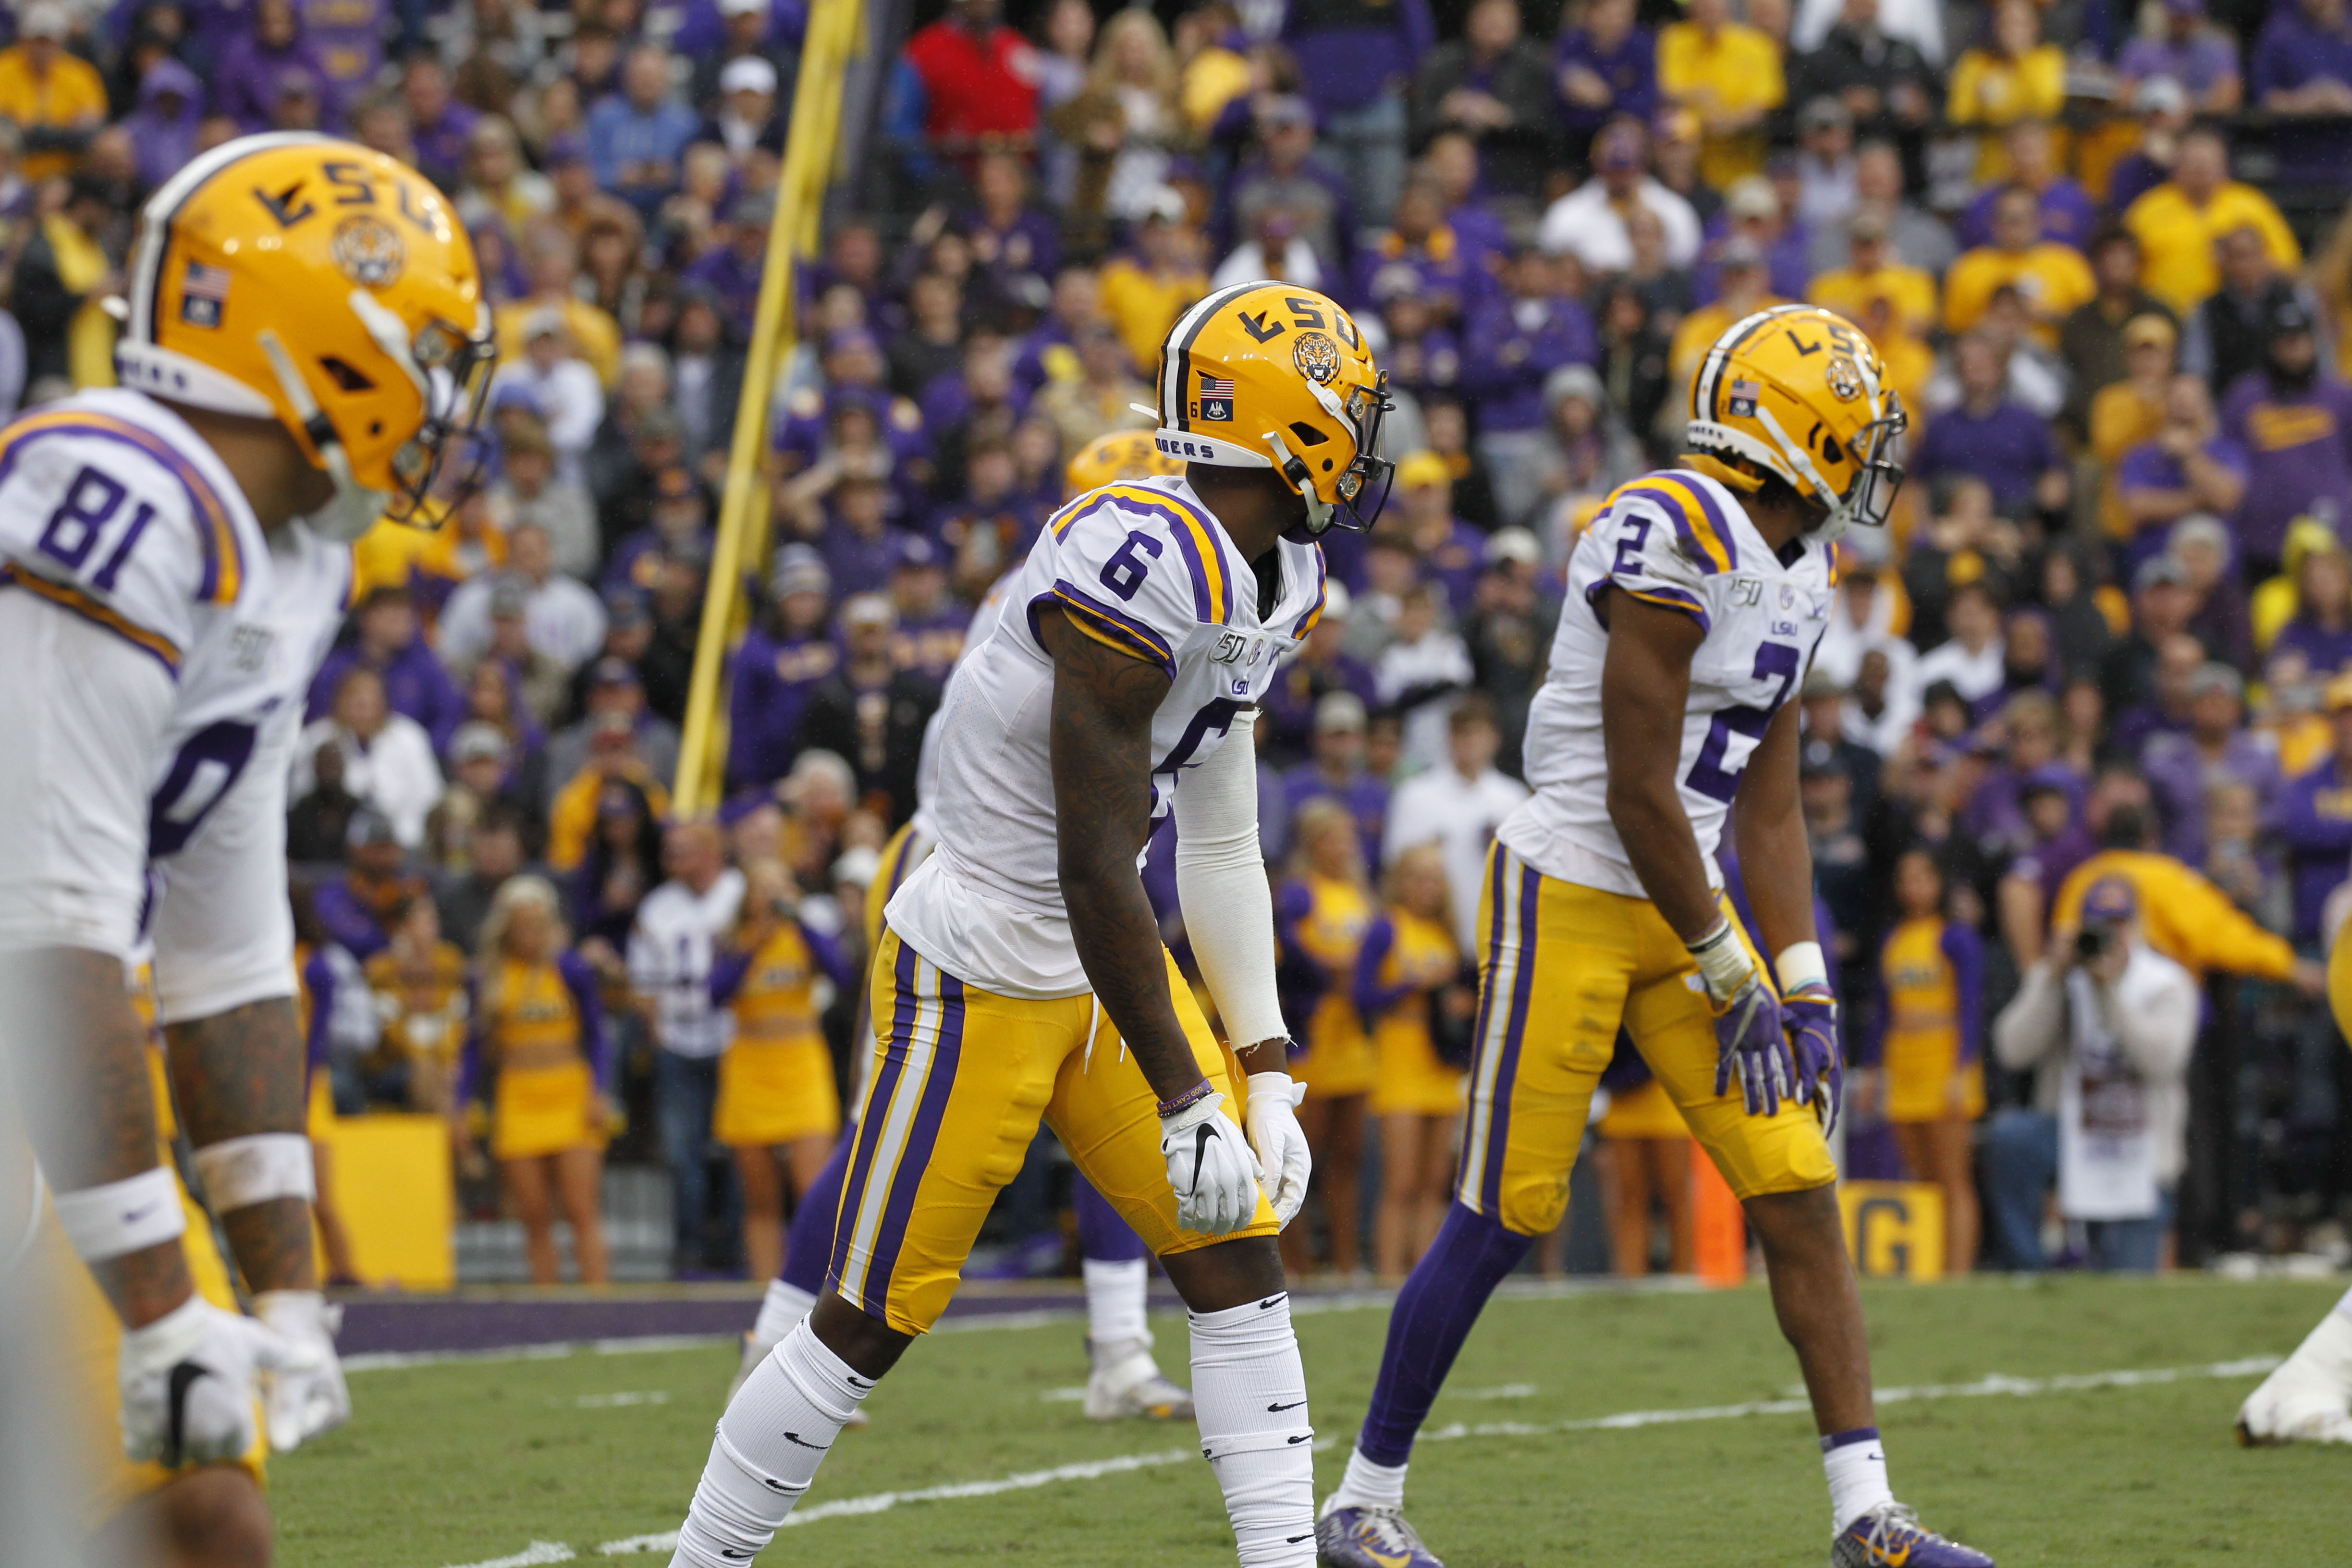 WHAT TO EXPECT LSU VS BAMA: THIS ISN’T THE SAME OLD OFFENSE